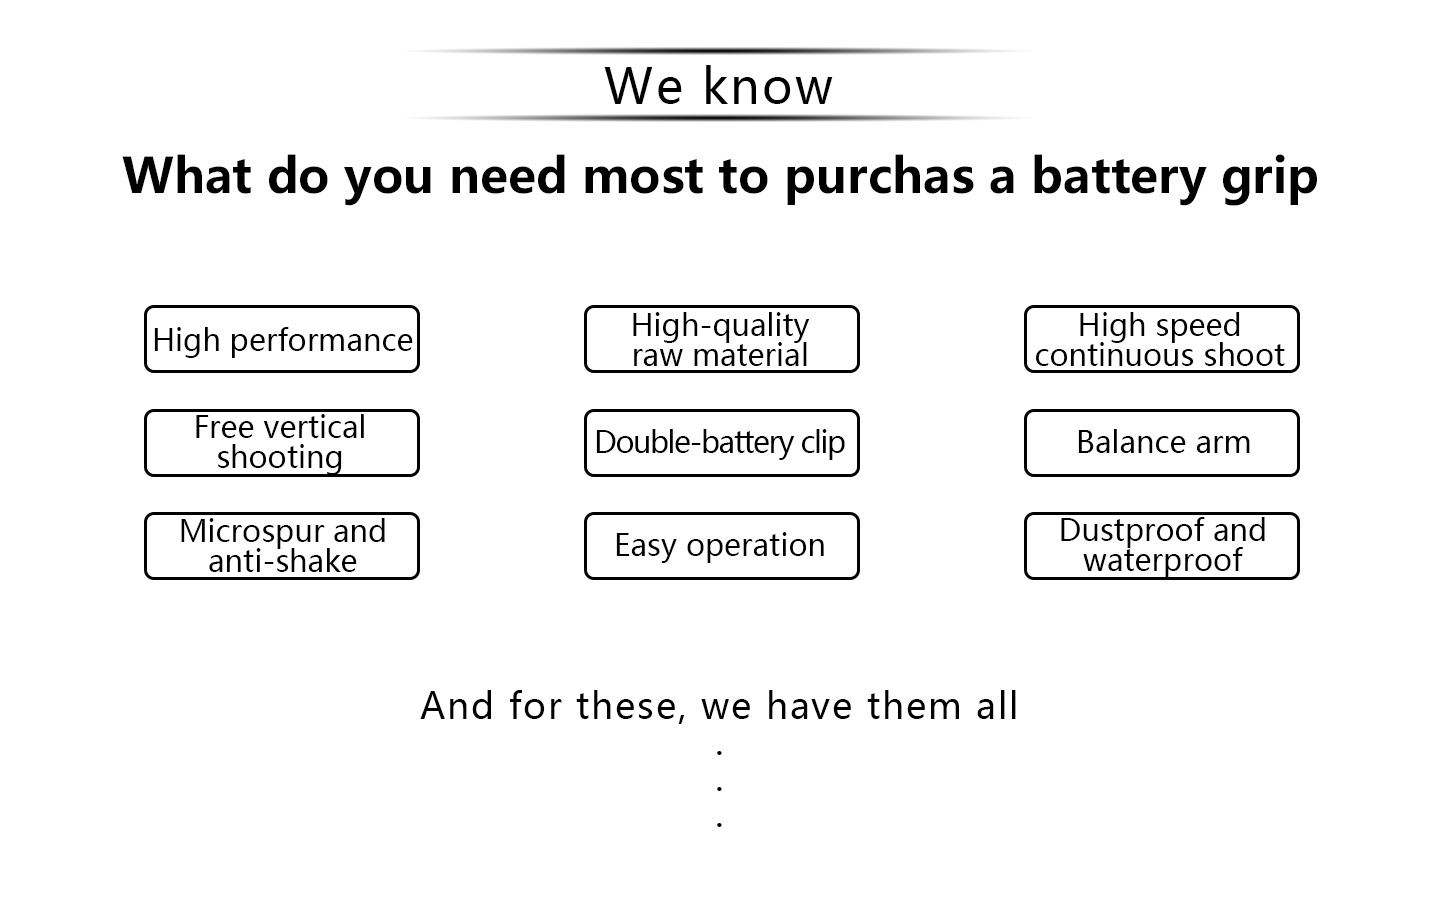 What do you need most to purchas a battery grip